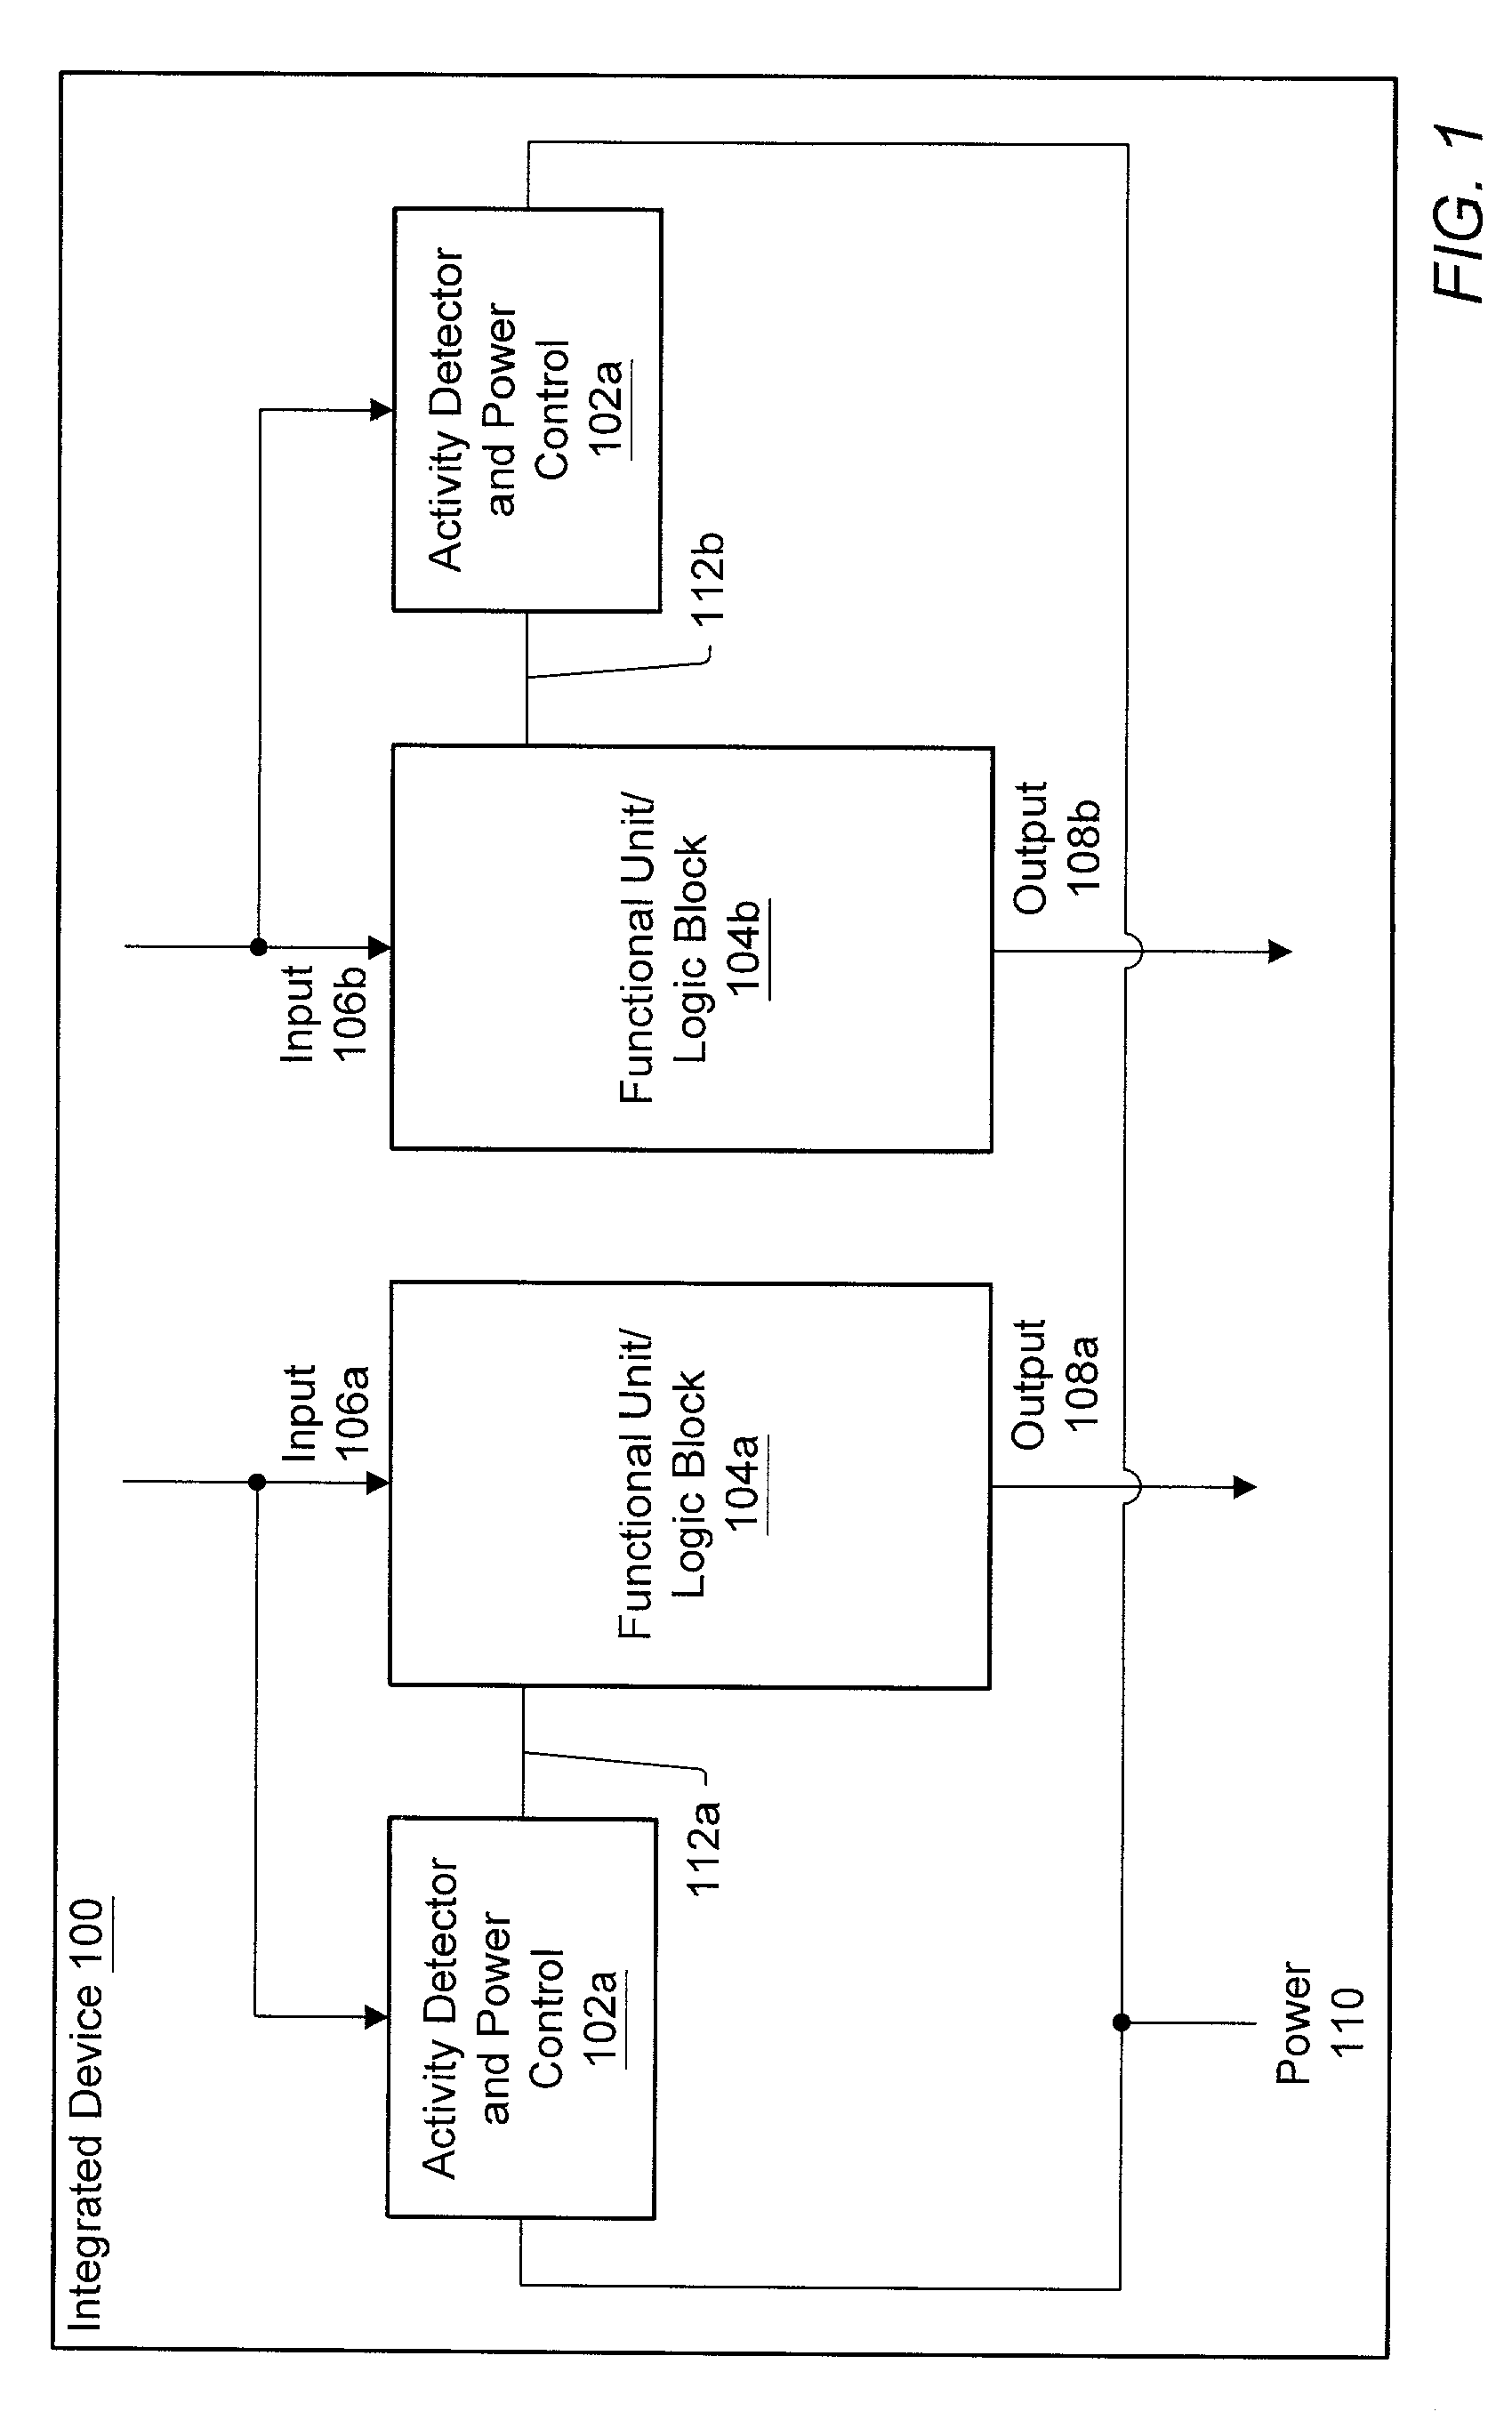 Apparatus and method for decreasing power consumption in an integrated circuit